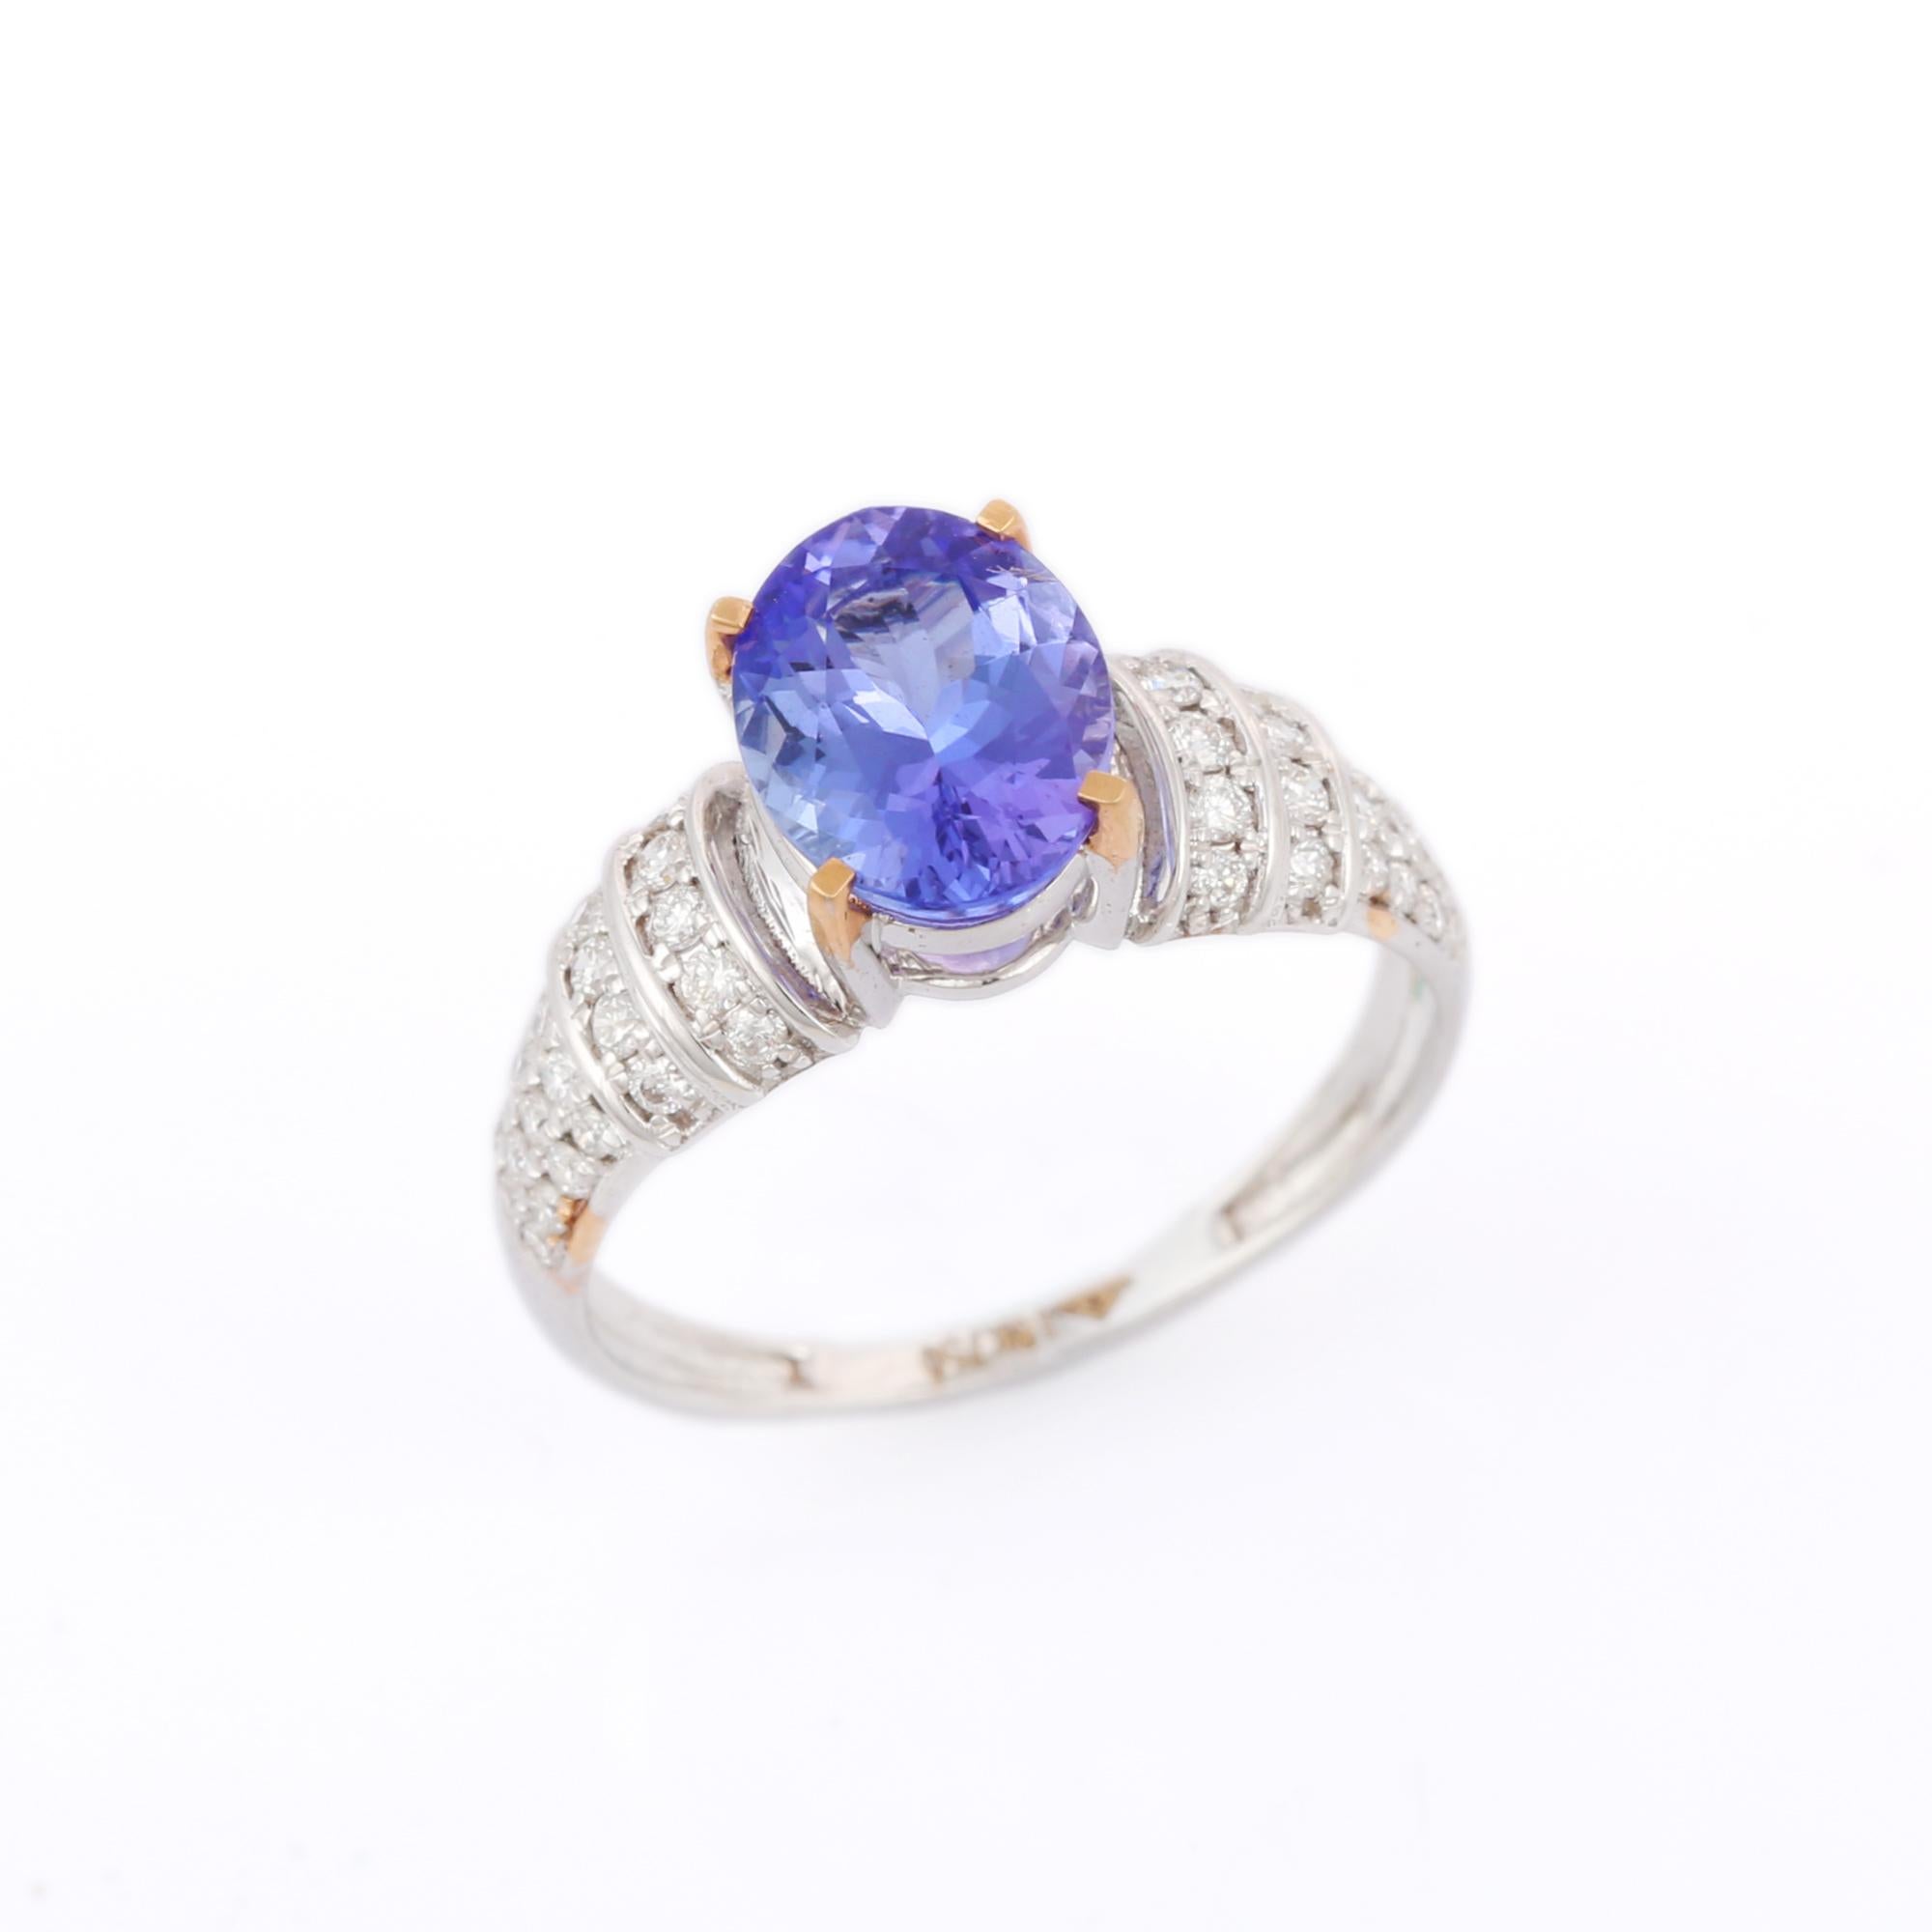 For Sale:  Oval Tanzanite and Diamond Ring in 18k Solid White Gold 3